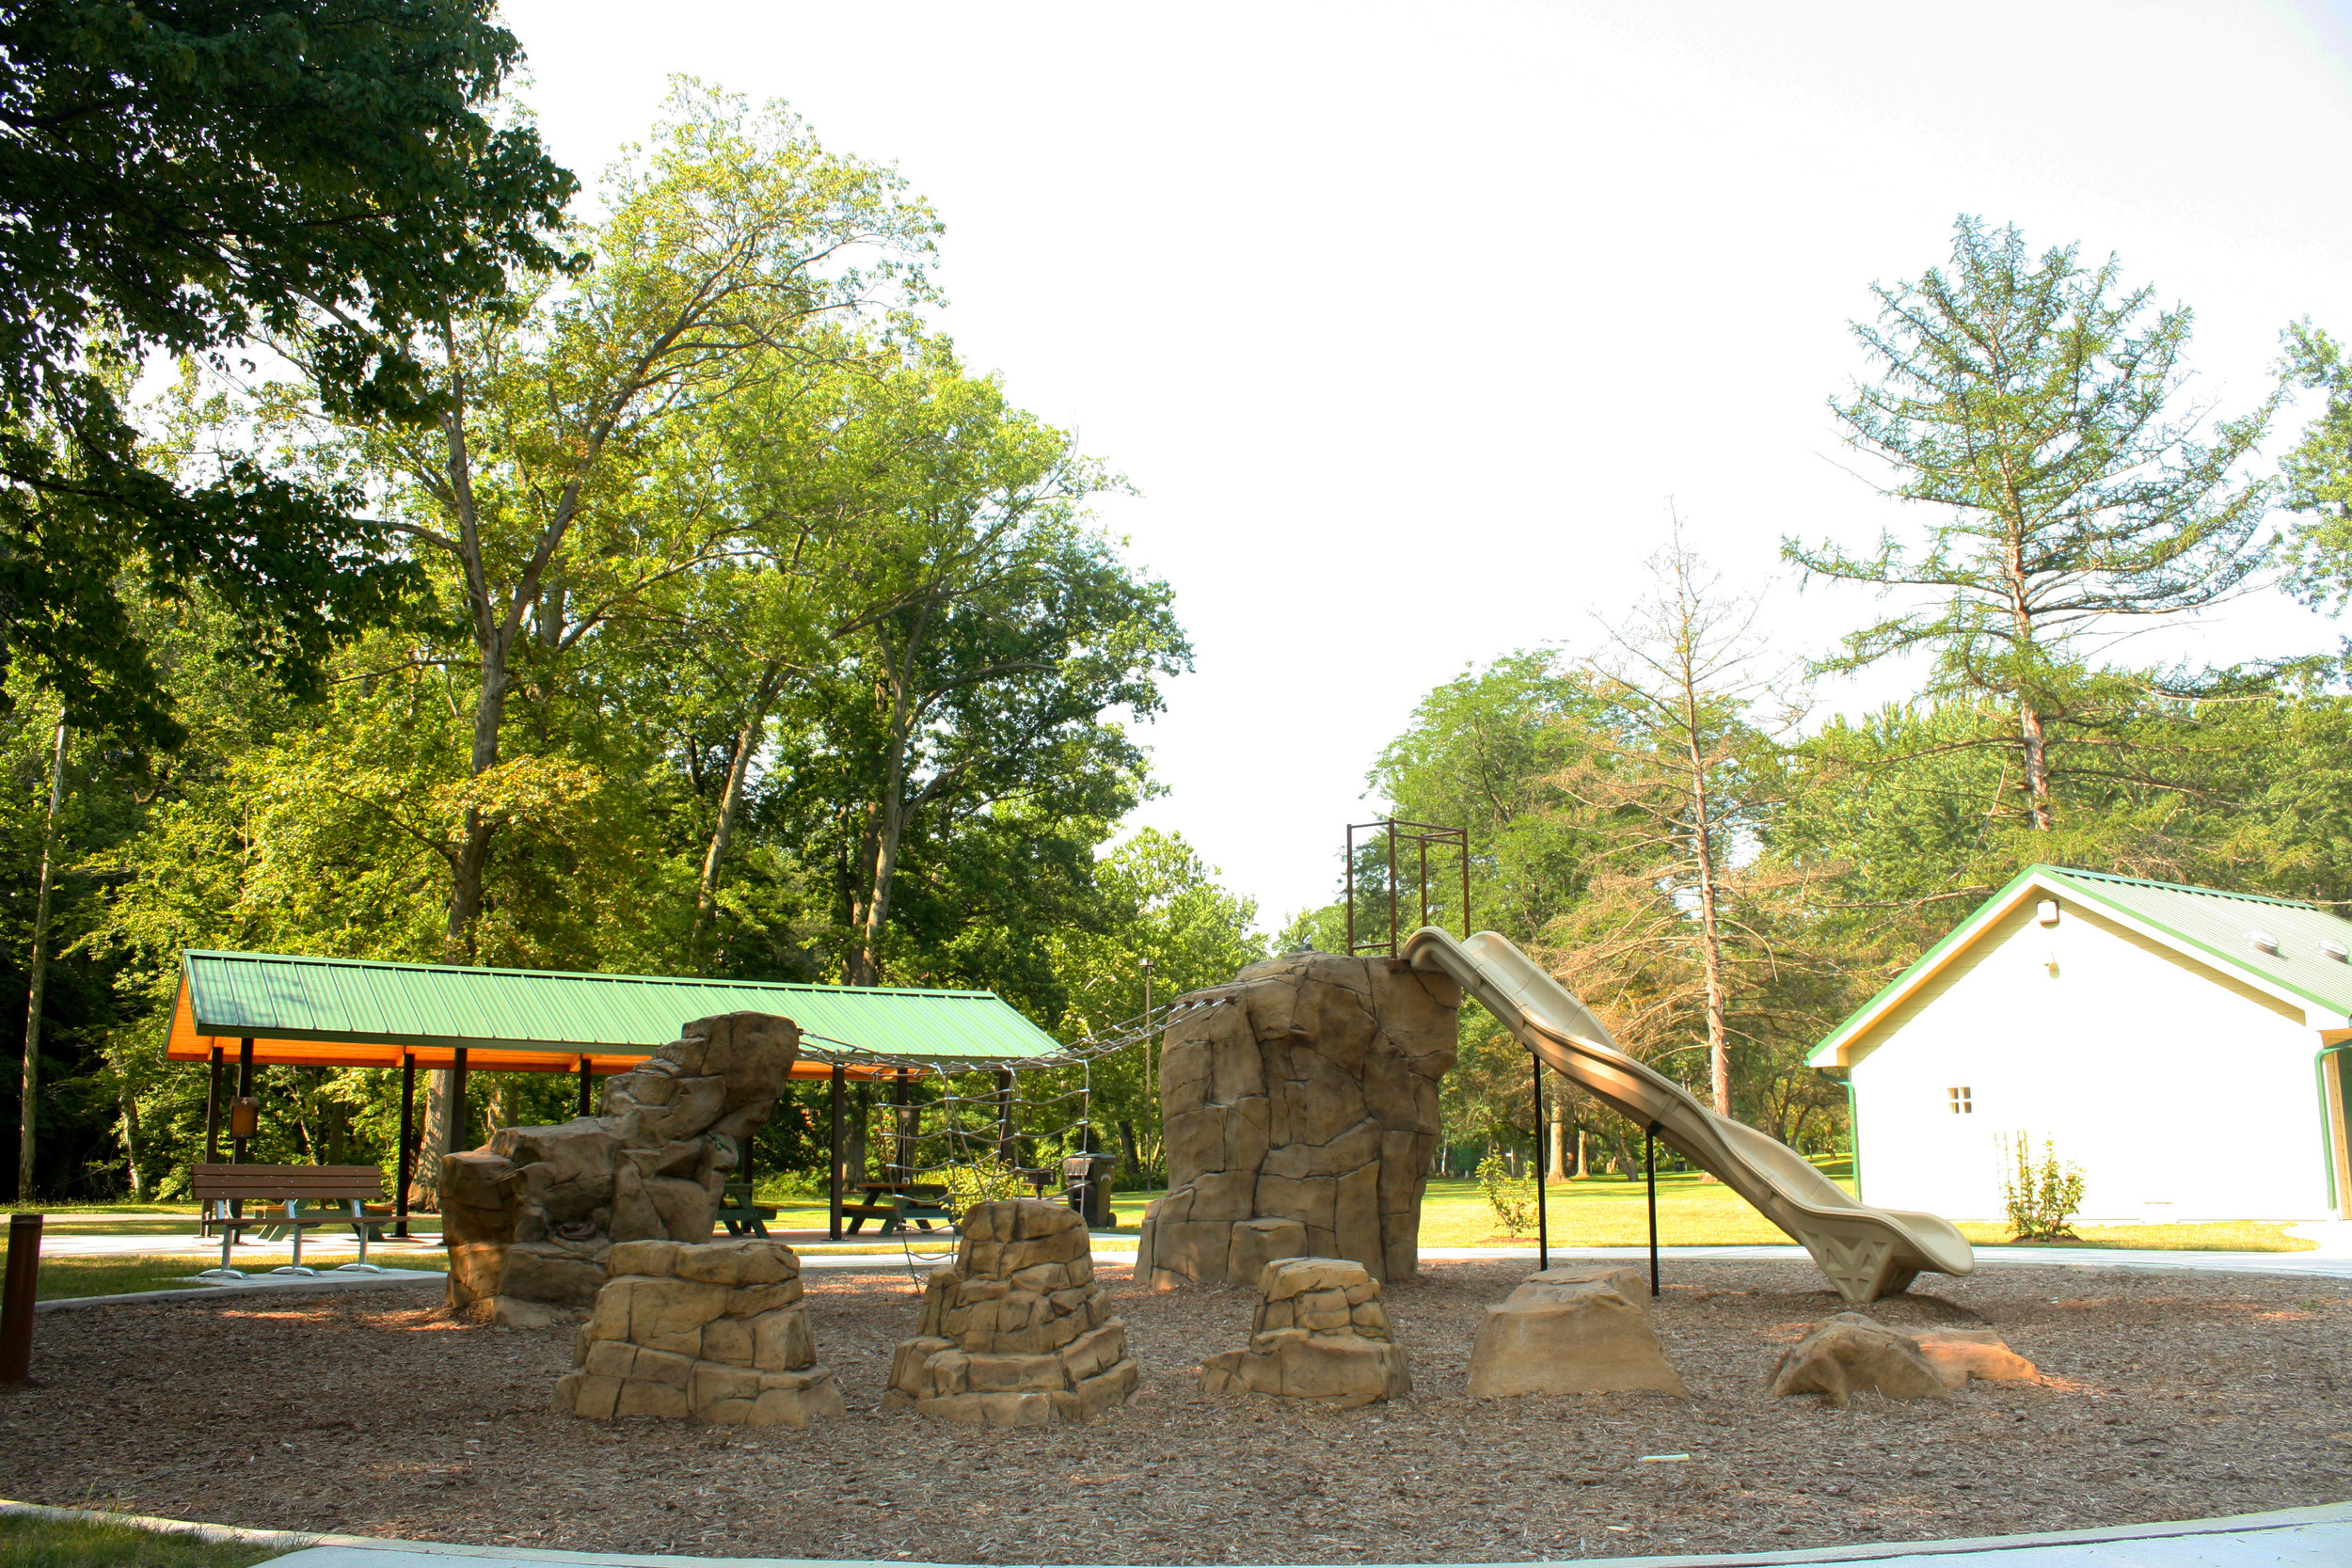 Playground at the 19 Acres Picnic Area